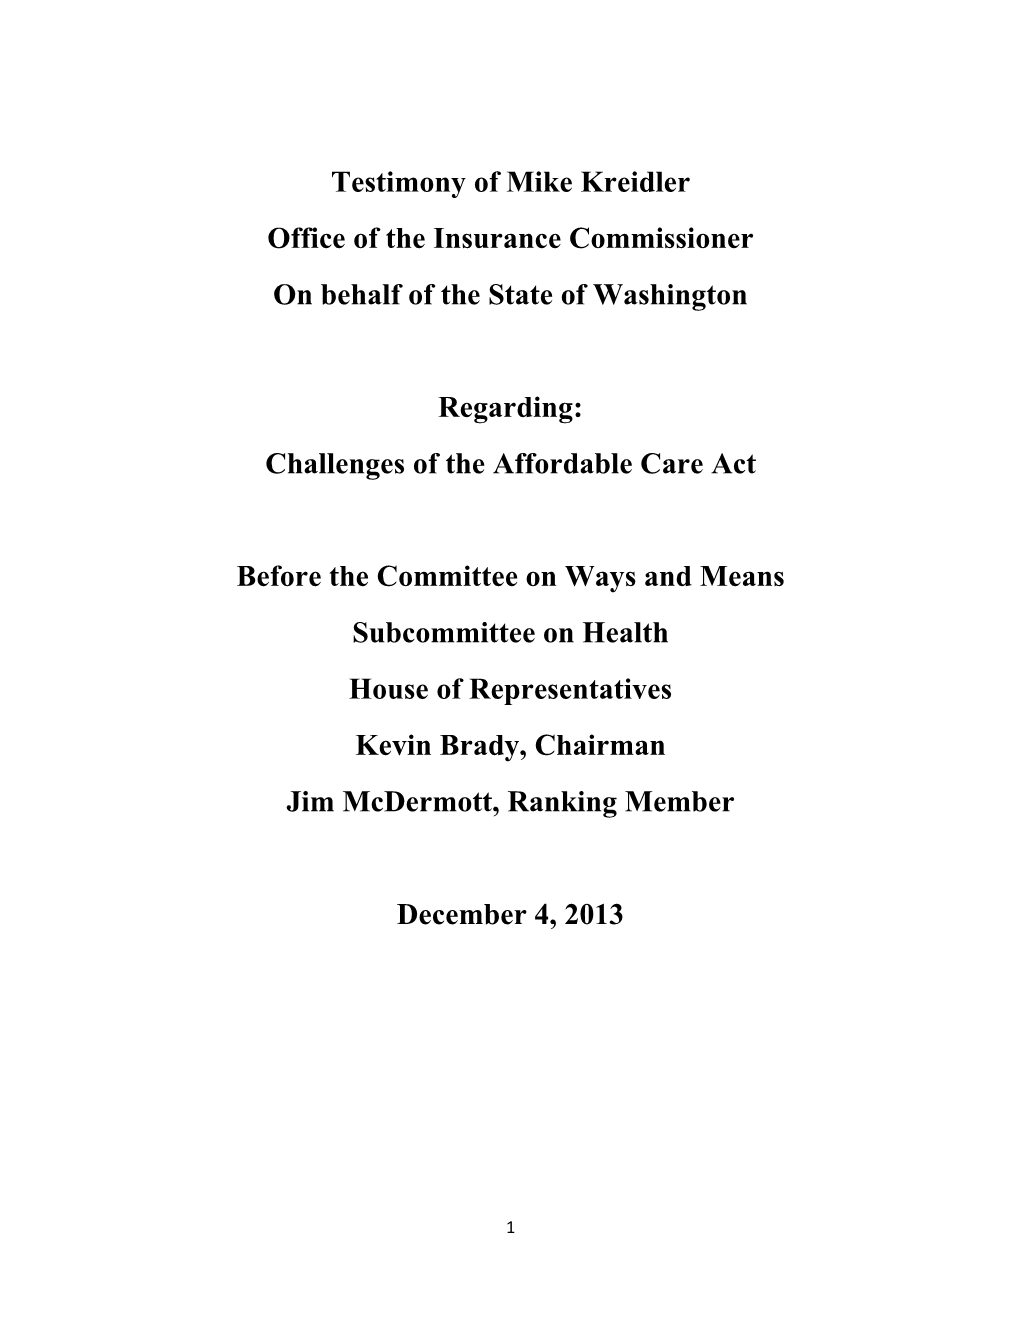 Testimony of Mike Kreidler Office of the Insurance Commissioner on Behalf of the State of Washington